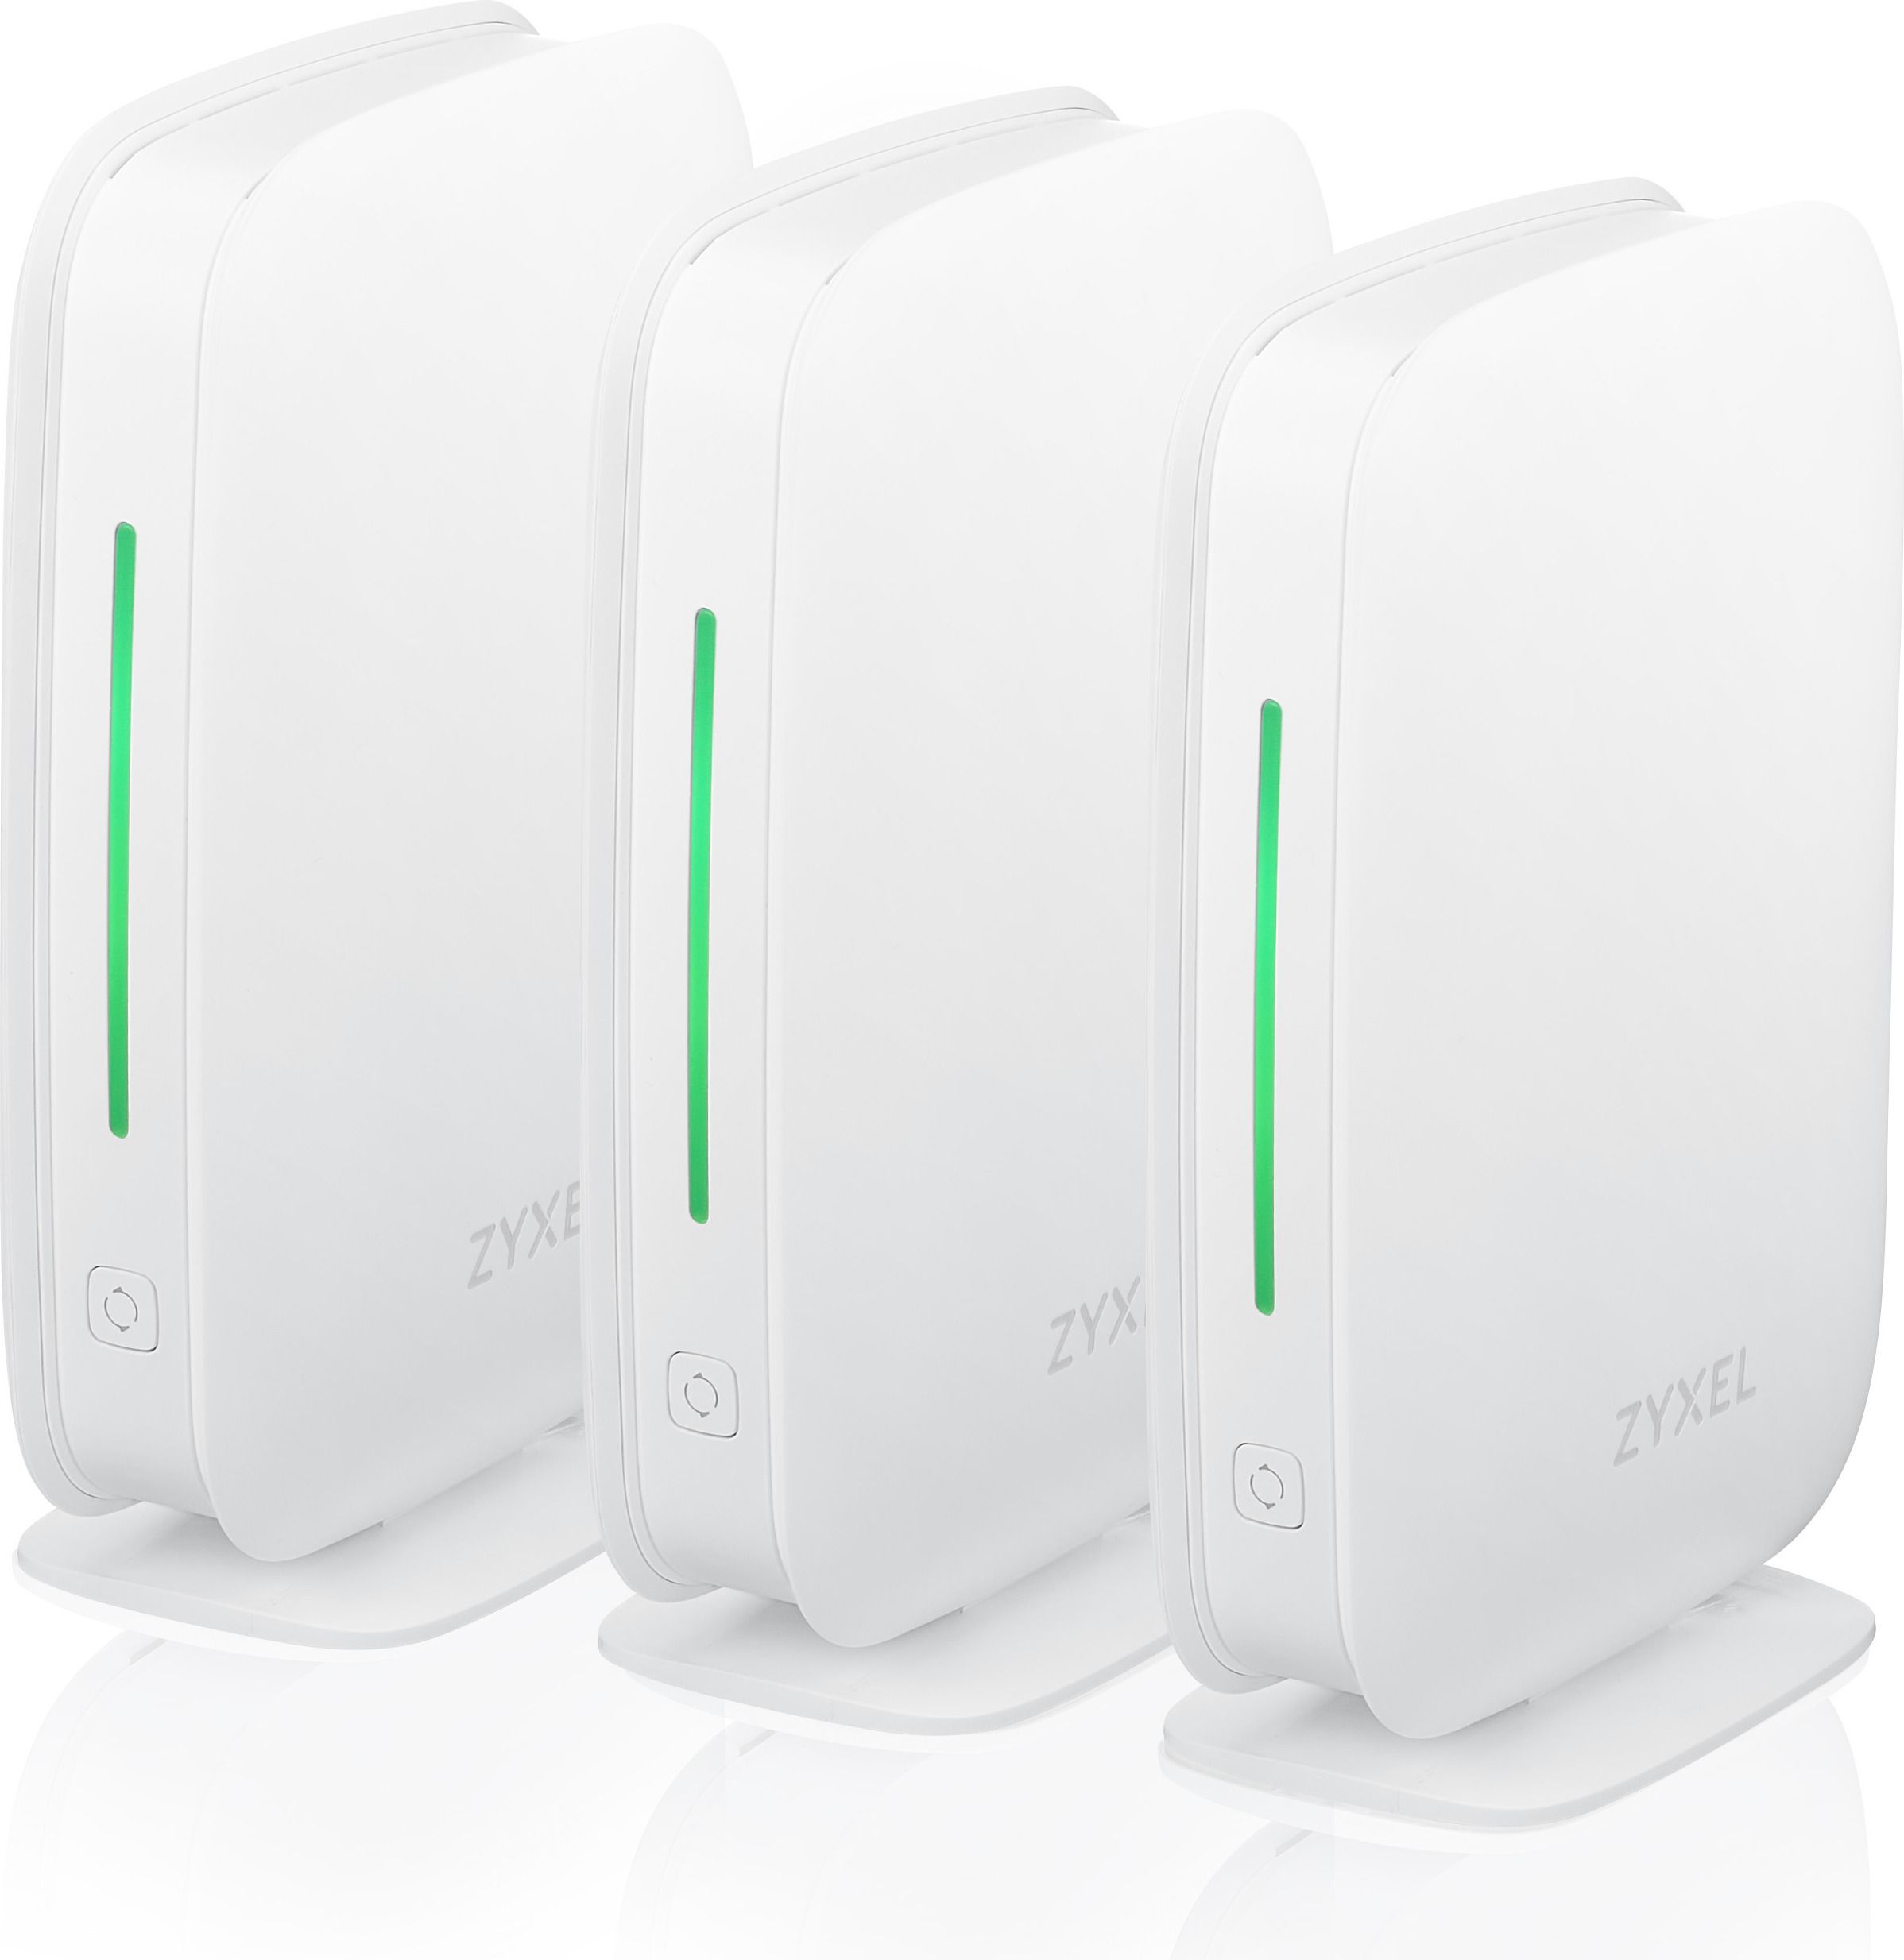 ZYXEL Multy M1 WiFi System Pack of 3 AX1800 Dual-Band WiFi